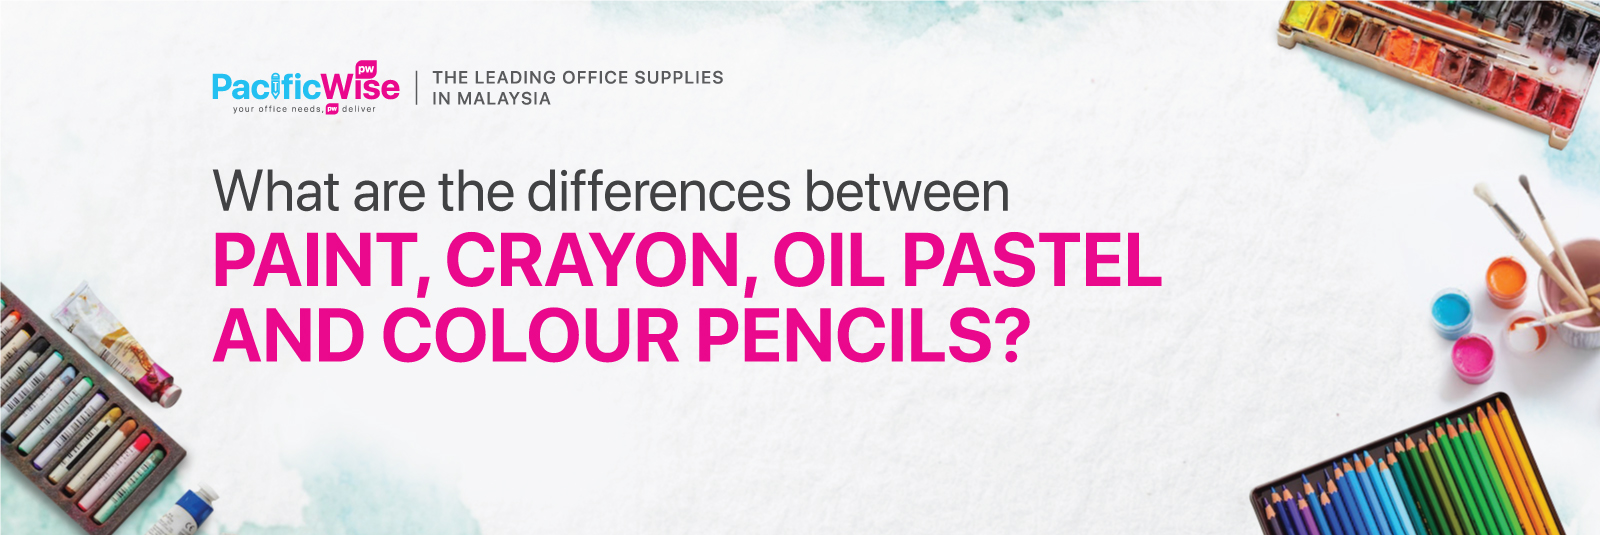 What are the differences between paint, crayon, oil pastel, and colour pencils